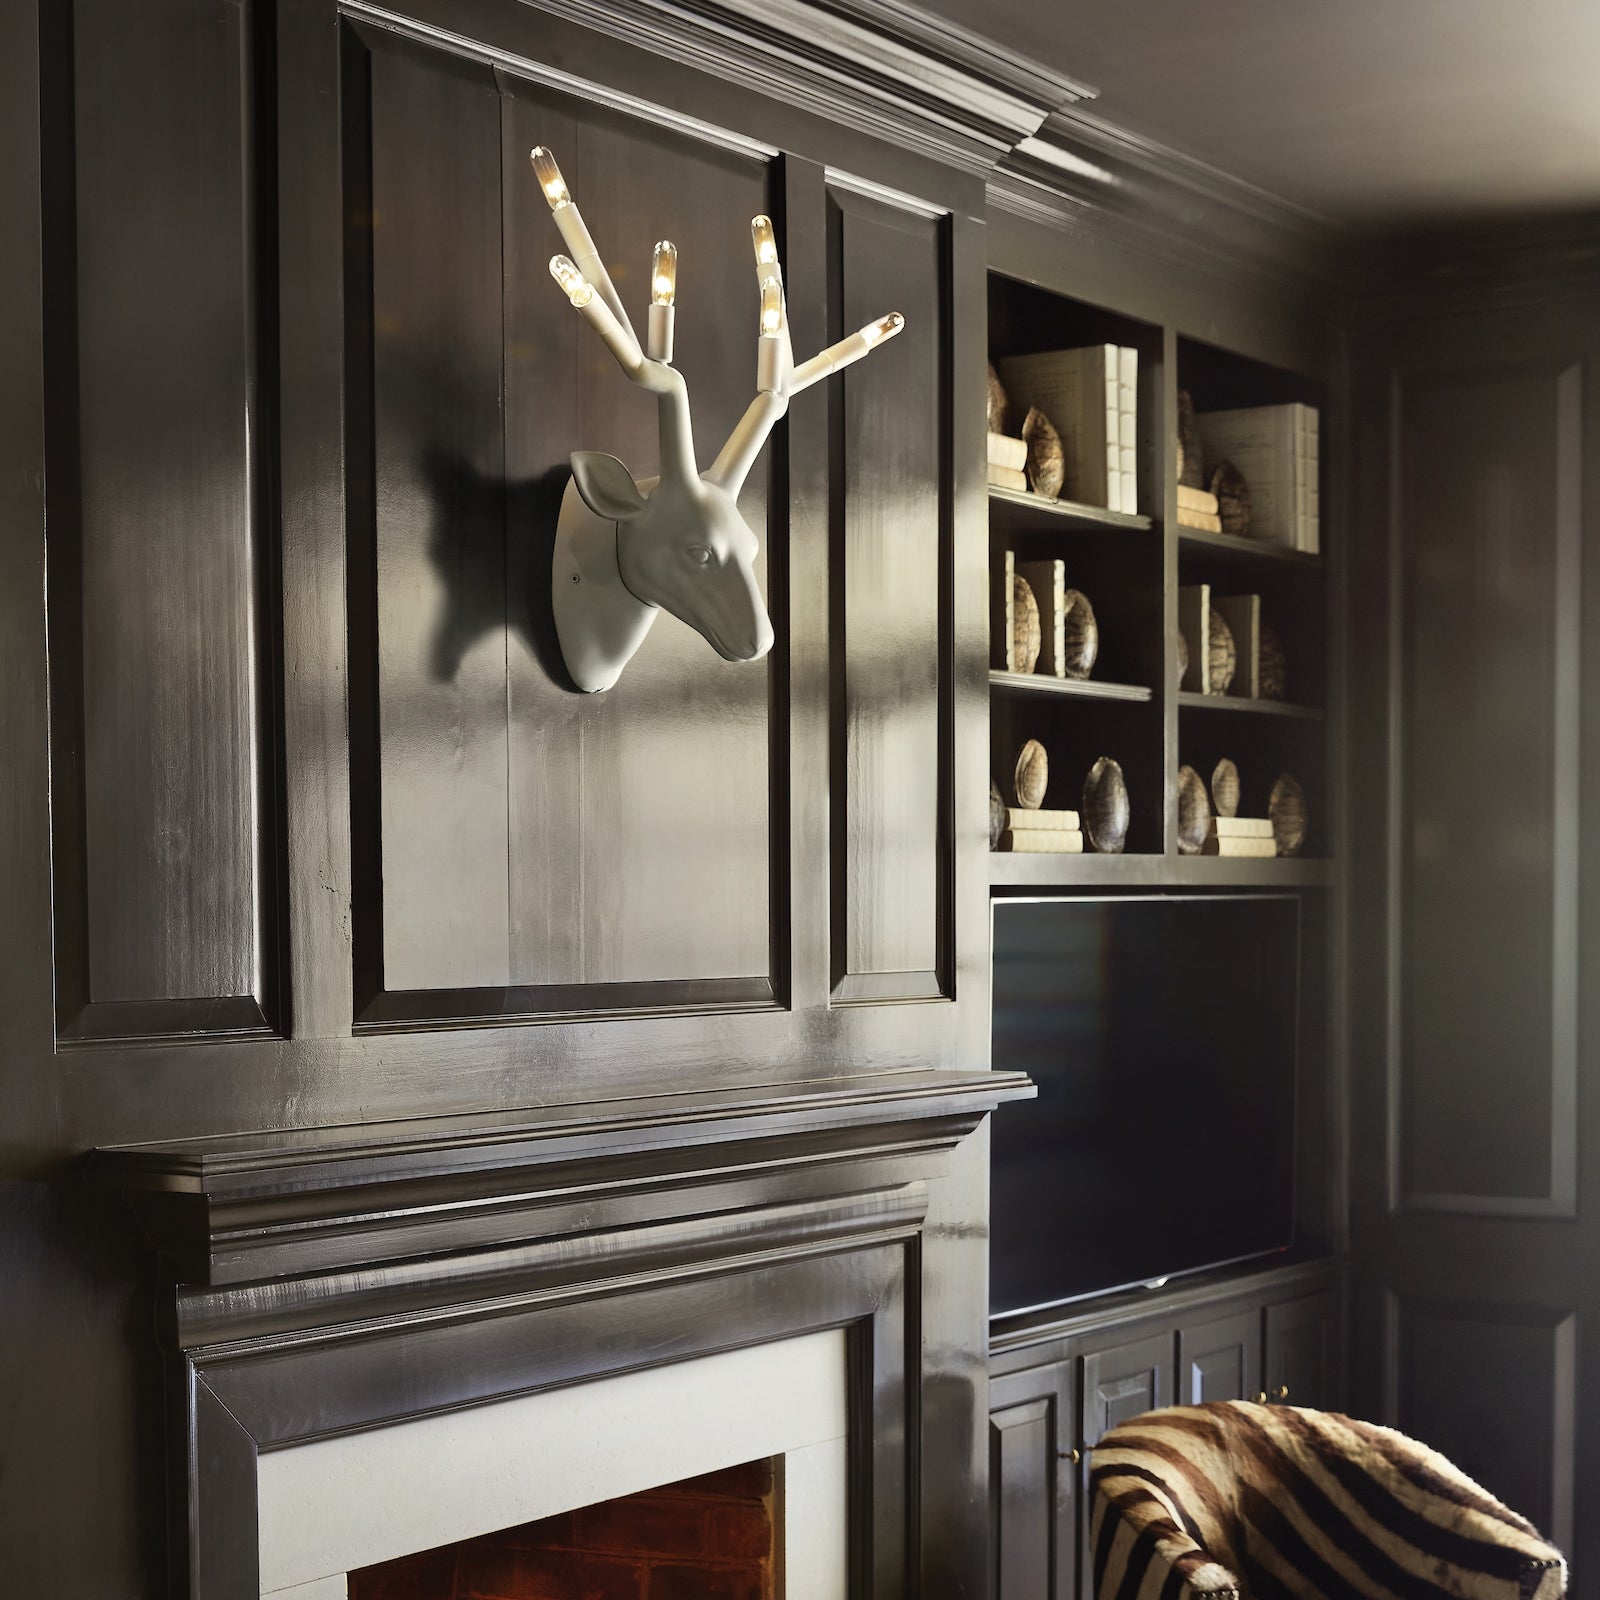 Hinkley Stag Six Light Sconce